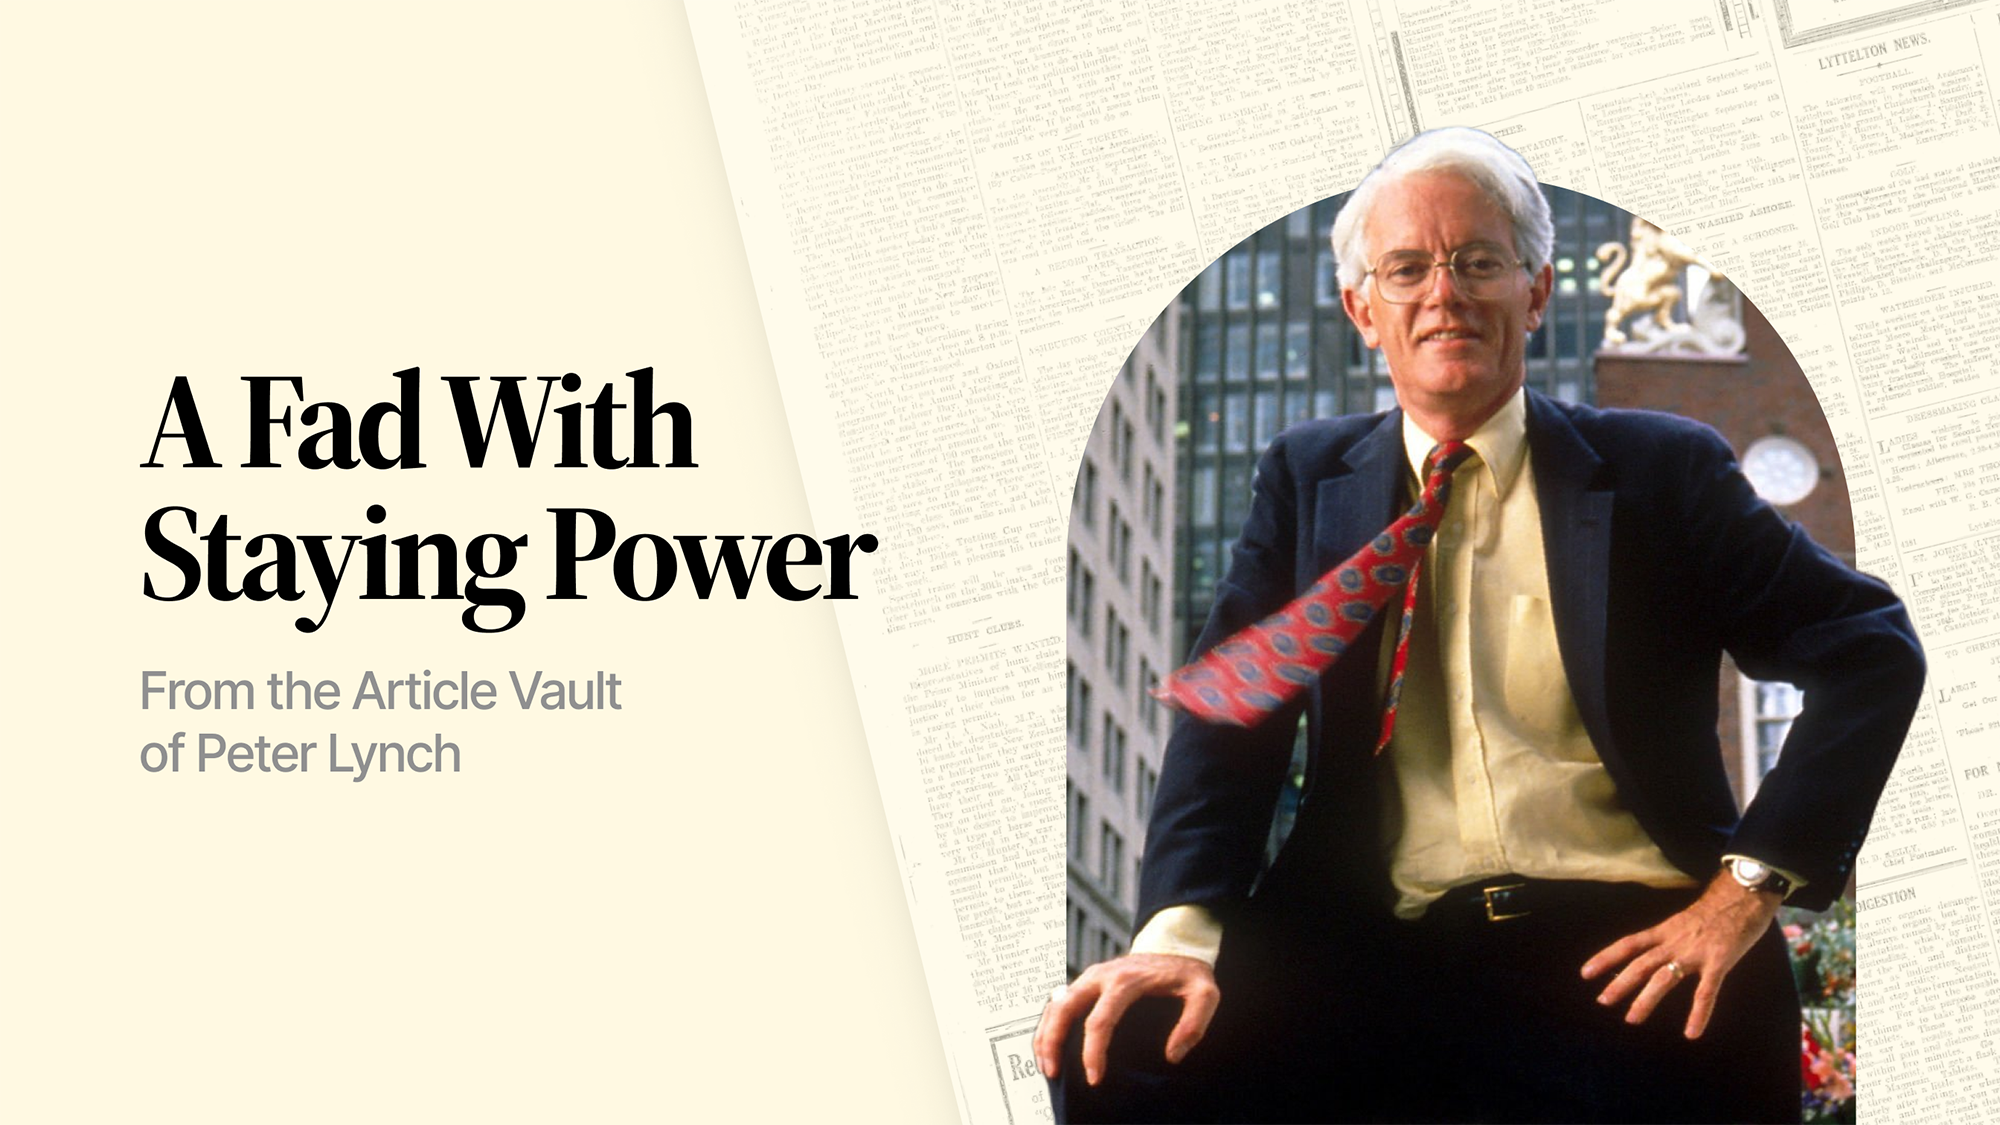 The article "A fad with staying power" from the notorious investor Peter Lynch